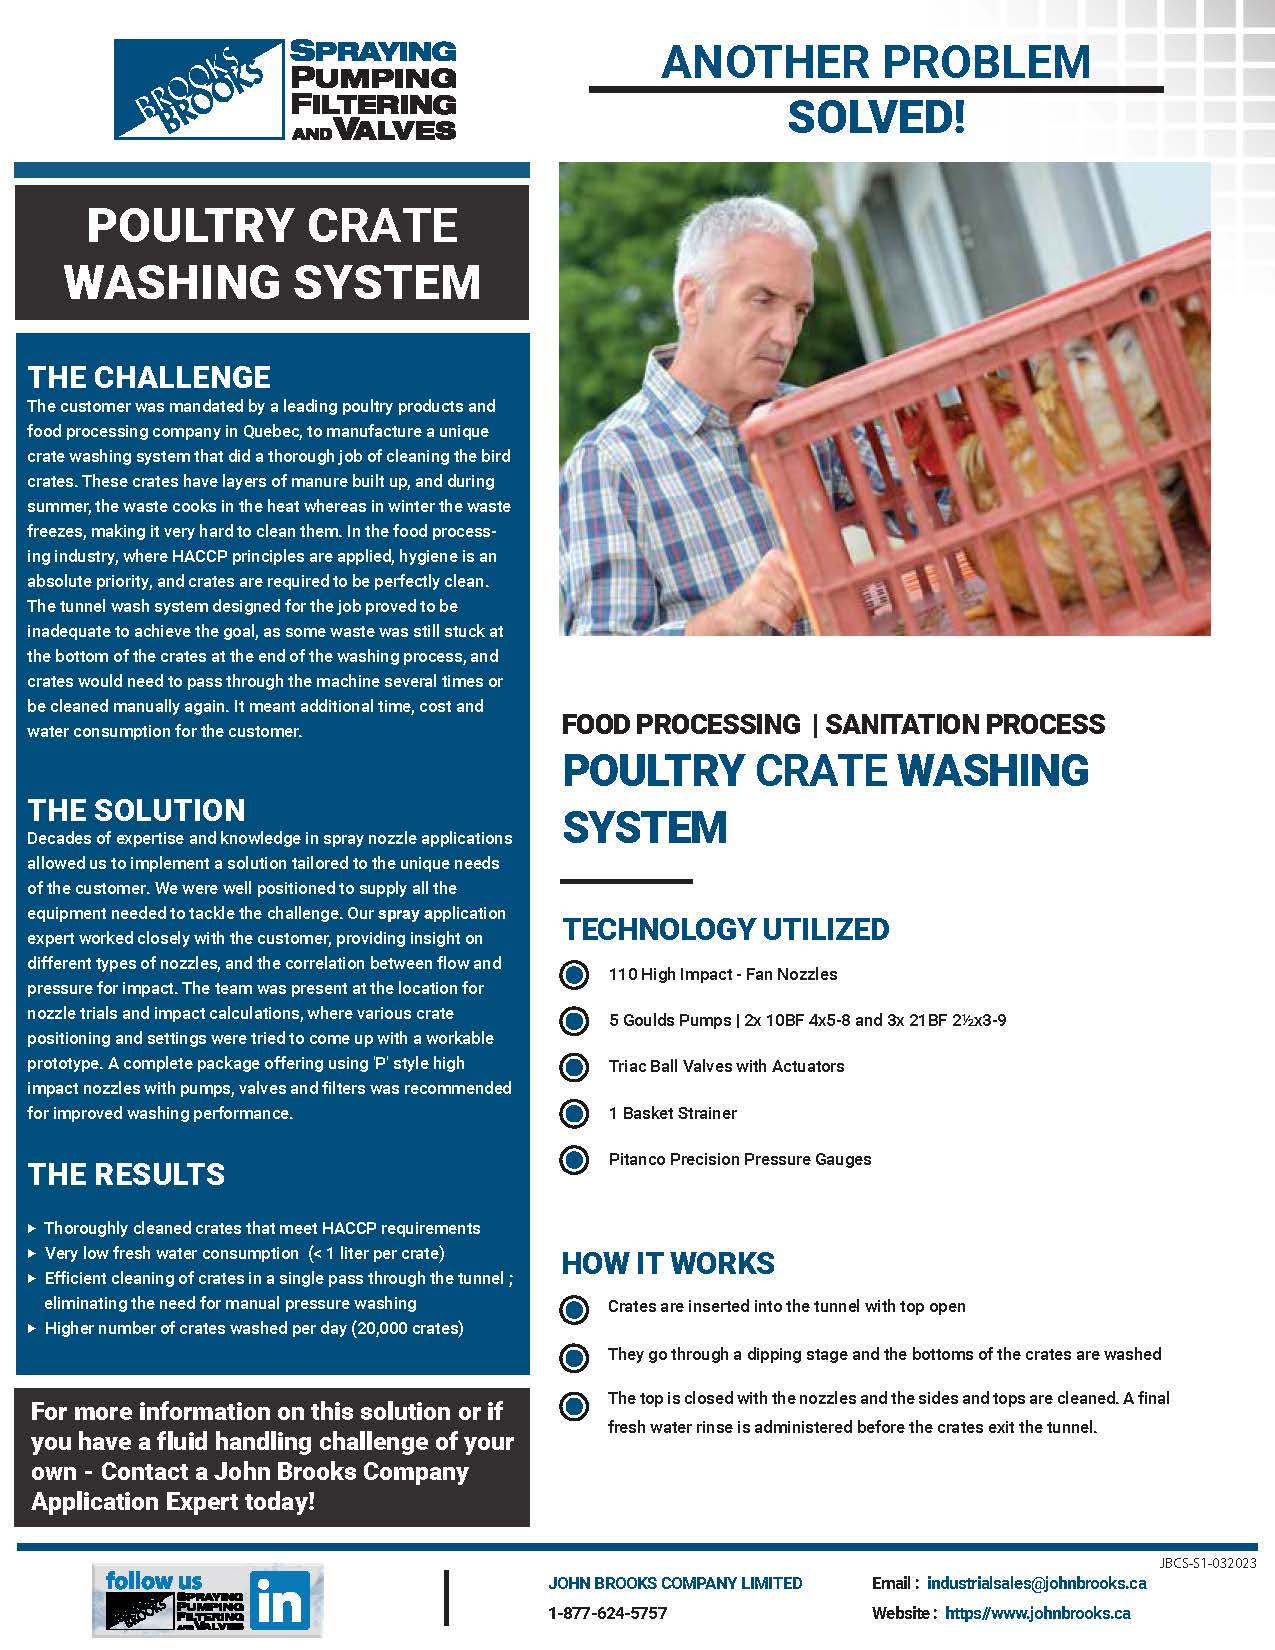 Poultry Crate Washing System